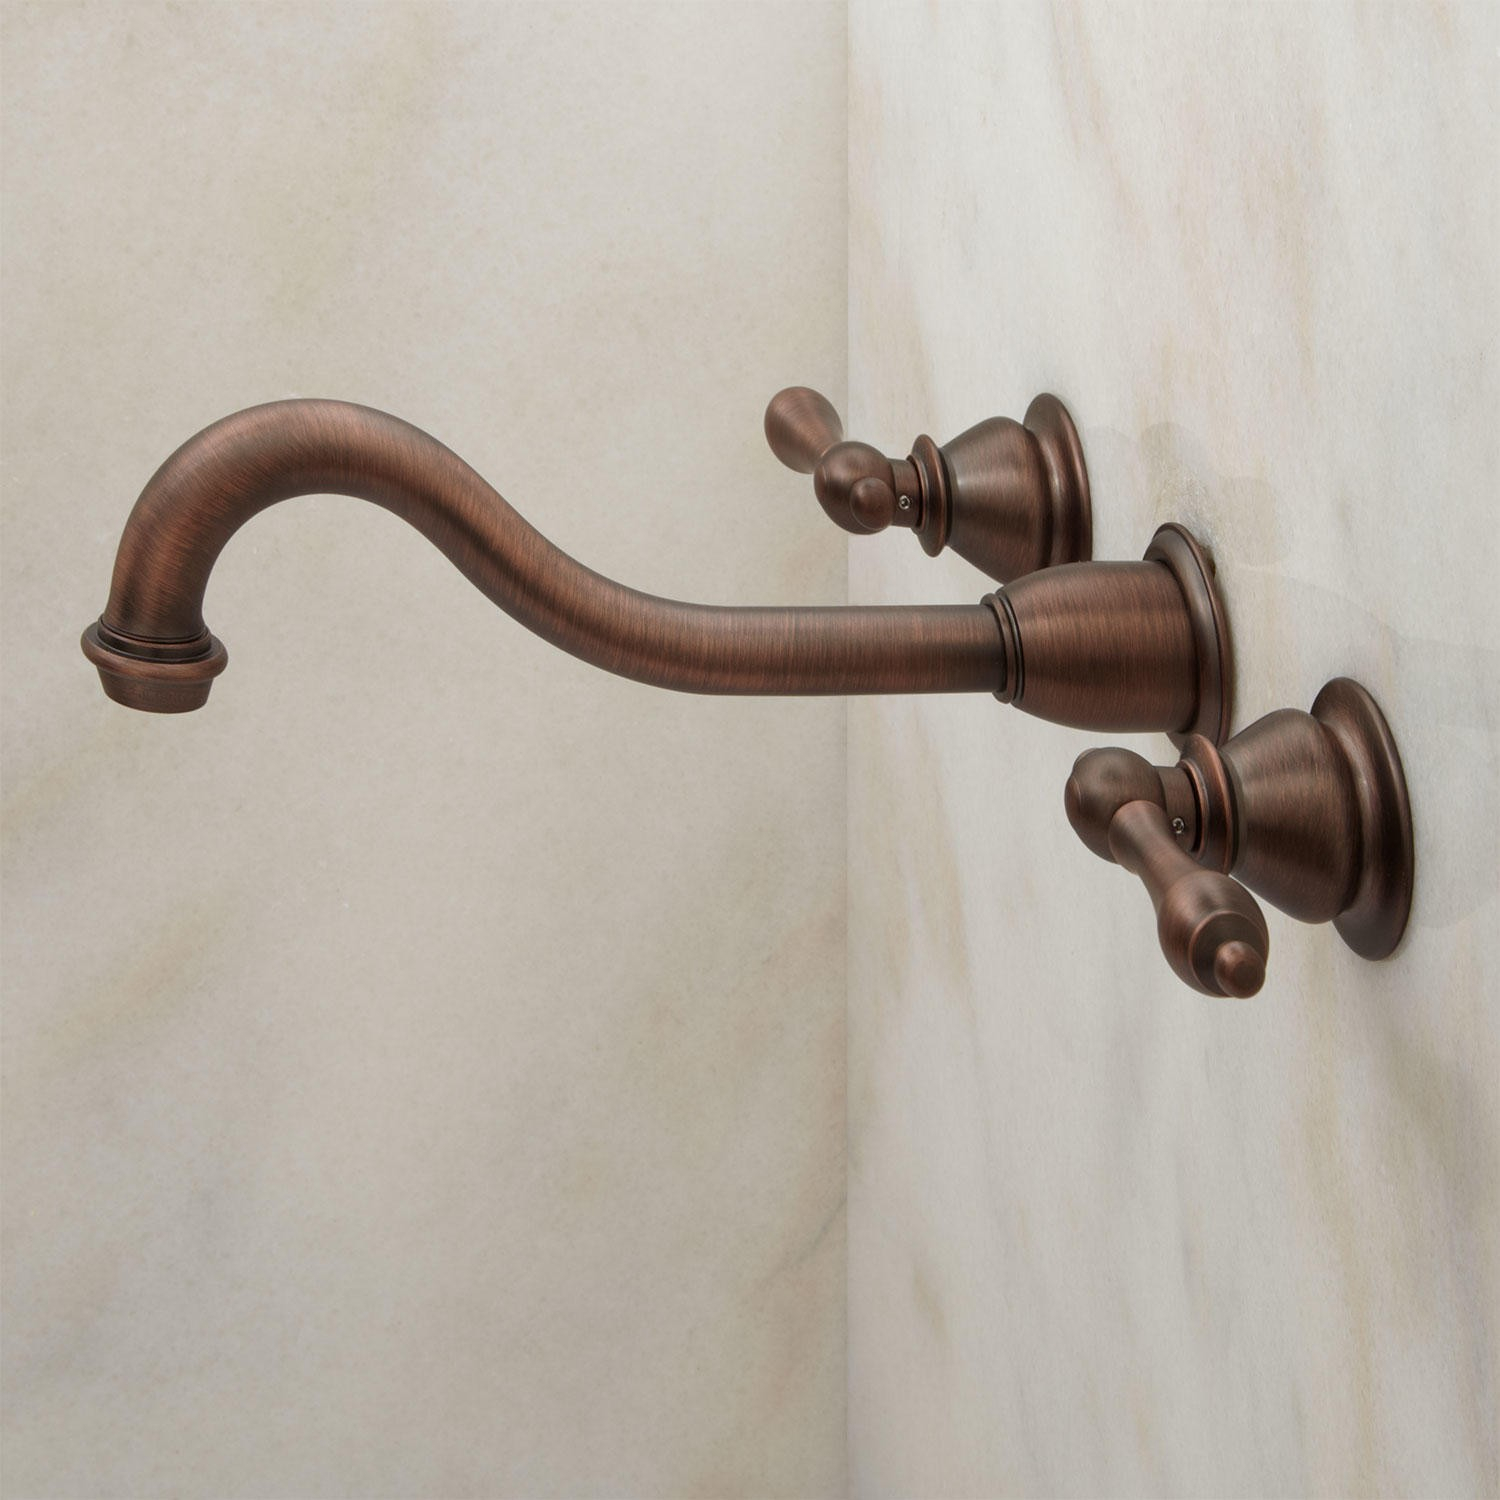 71 Most Blue Ribbon Kraus Faucets Wall Mounted Bathroom Brushed intended for size 1500 X 1500